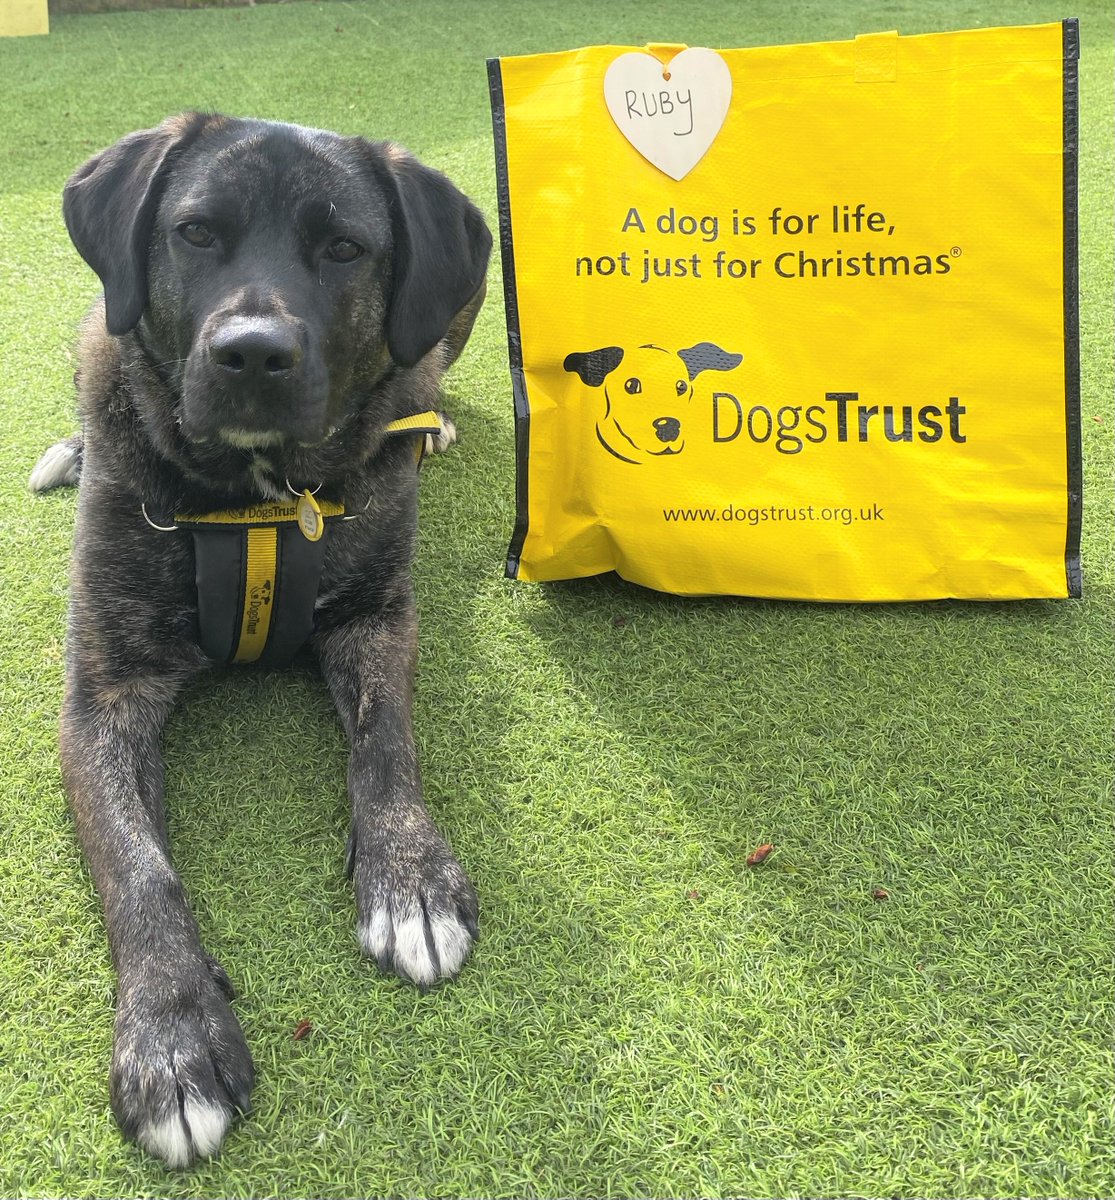 The gorgeous Ruby😍was all smiles this afternoon🐶as it was her turn to pack her bags🛍️and head off with her new family to her forever home🏡 #BigYellowBagDay #AdoptDontShop #ADogIsForLife @dogstrust